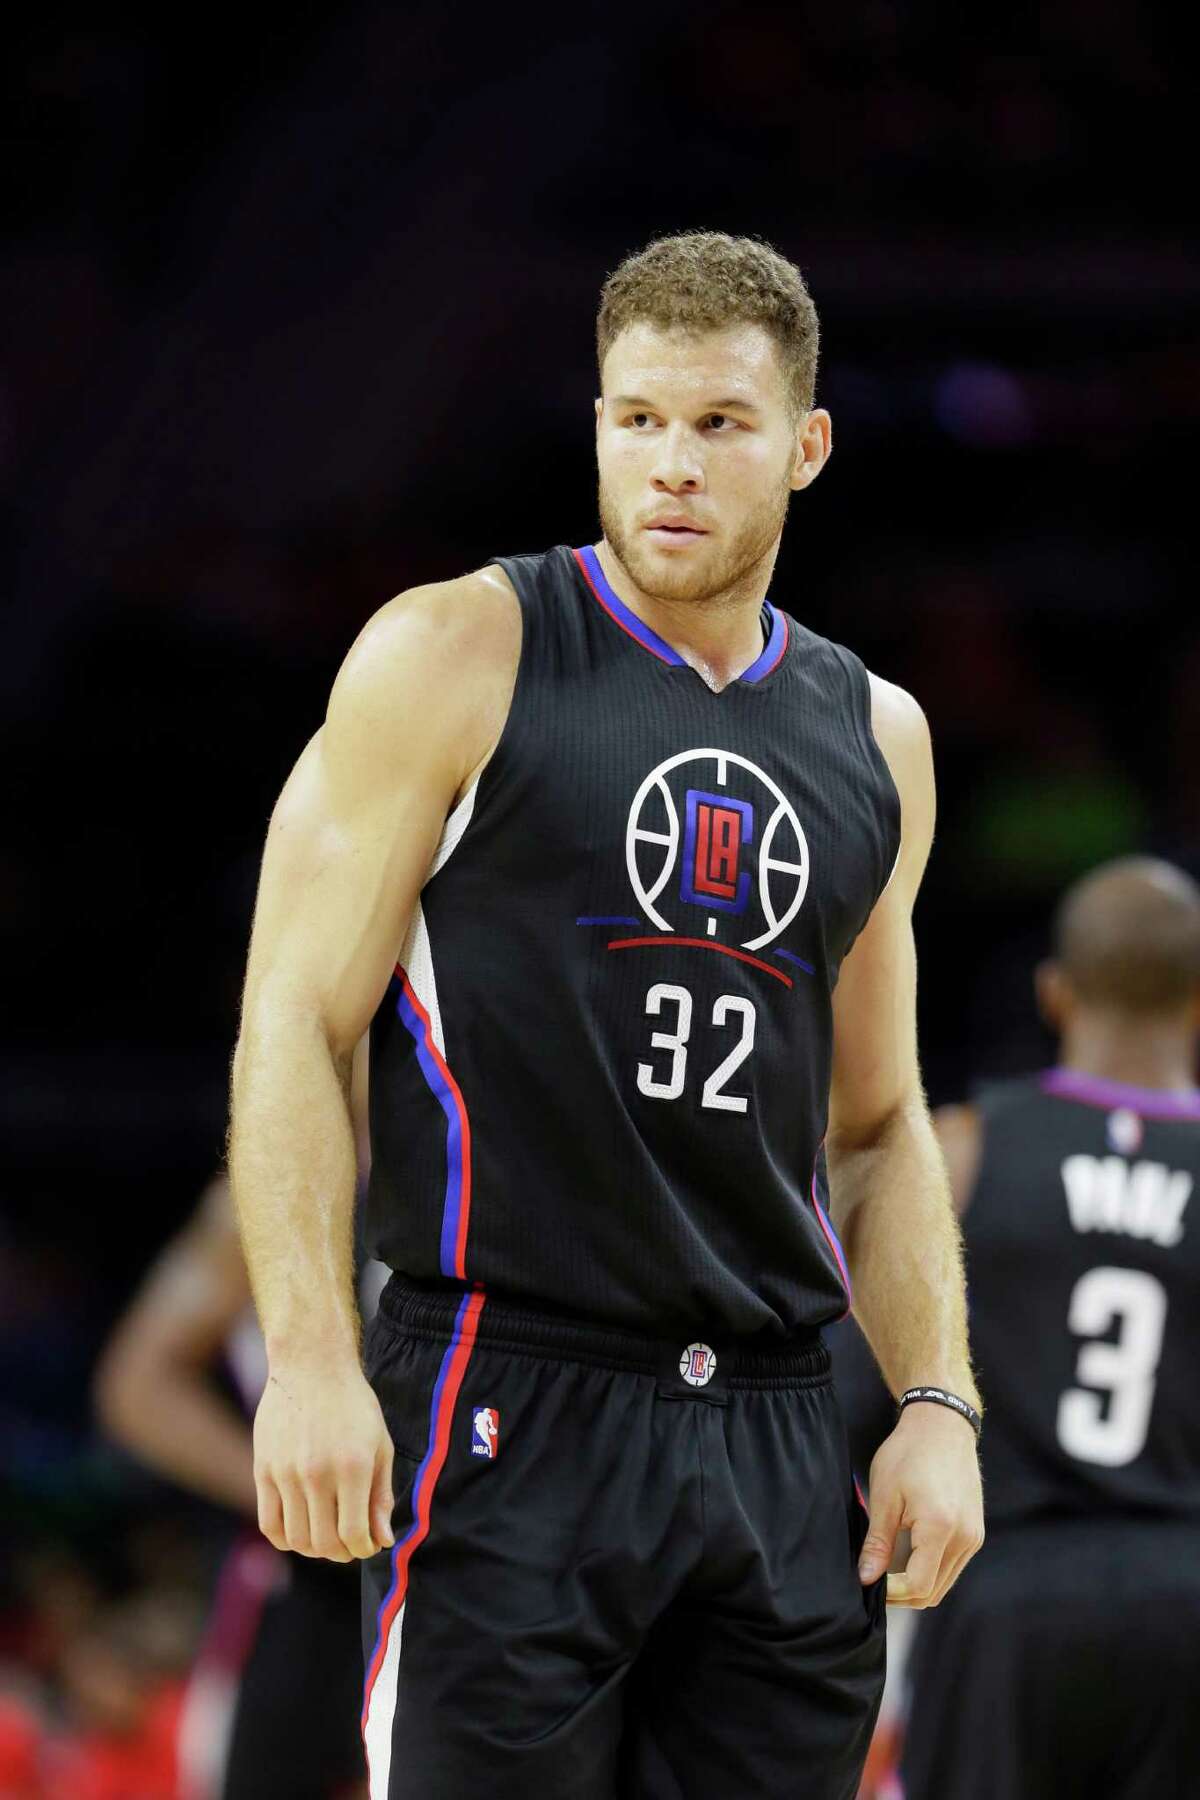 Los Angeles Clippers forward Blake Griffin (32), seen during the first half of an NBA basketball game against the Detroit Pistons, Monday, Dec. 14, 2015, in Auburn Hills, Mich. (AP Photo/Carlos Osorio)